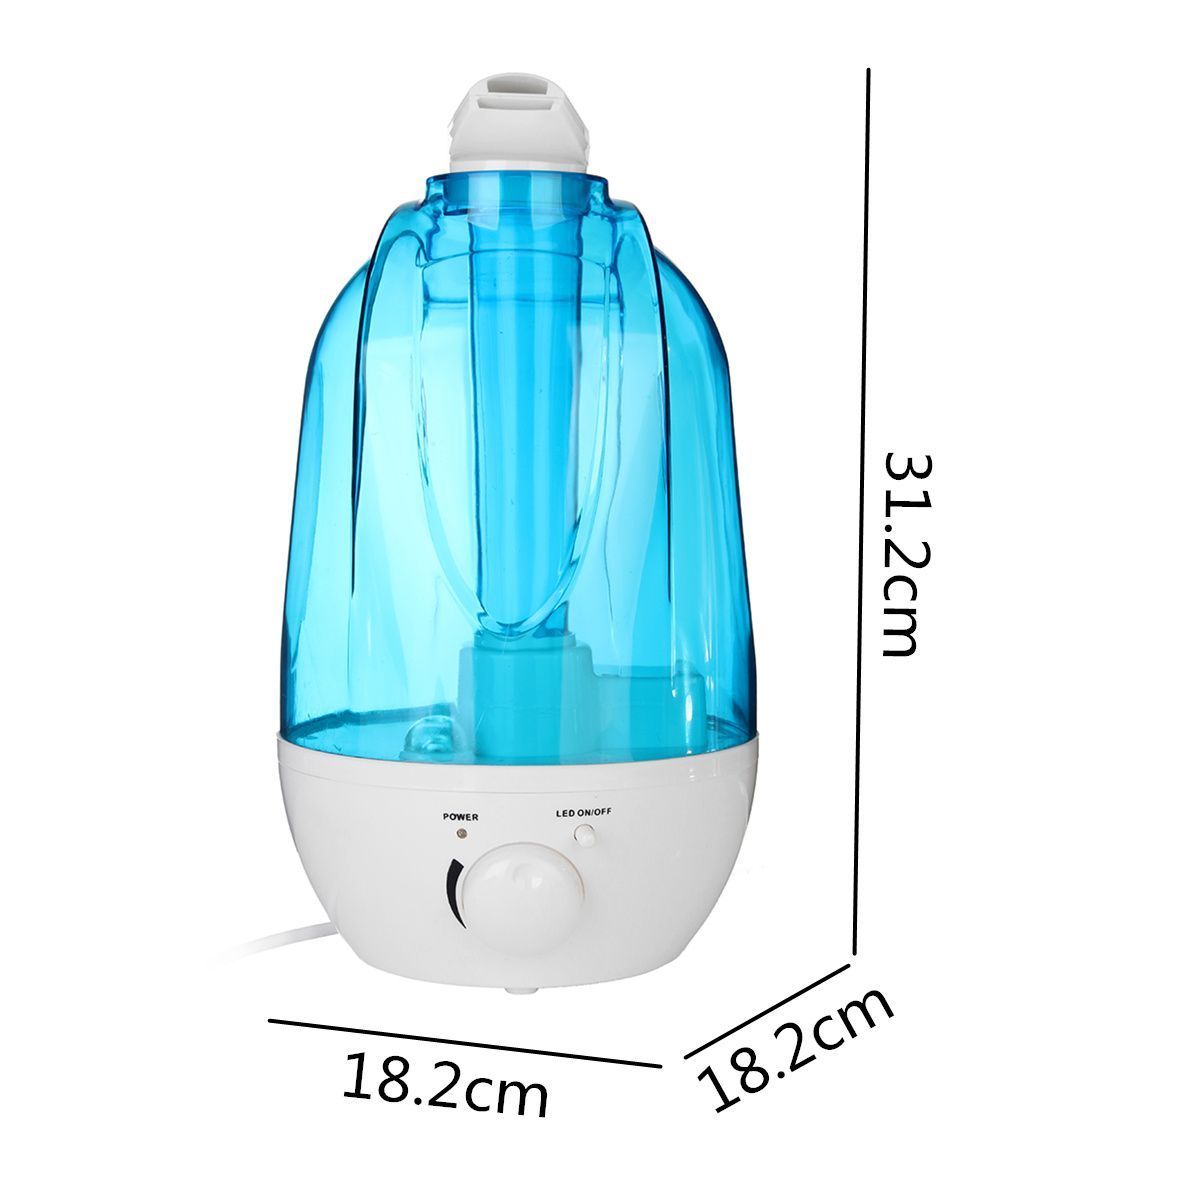 4L-Potable-LED-Ultrasonic-Humidifier-Atomiser-Air-Purifier-HomeOffice-20msup2-Room-1658521